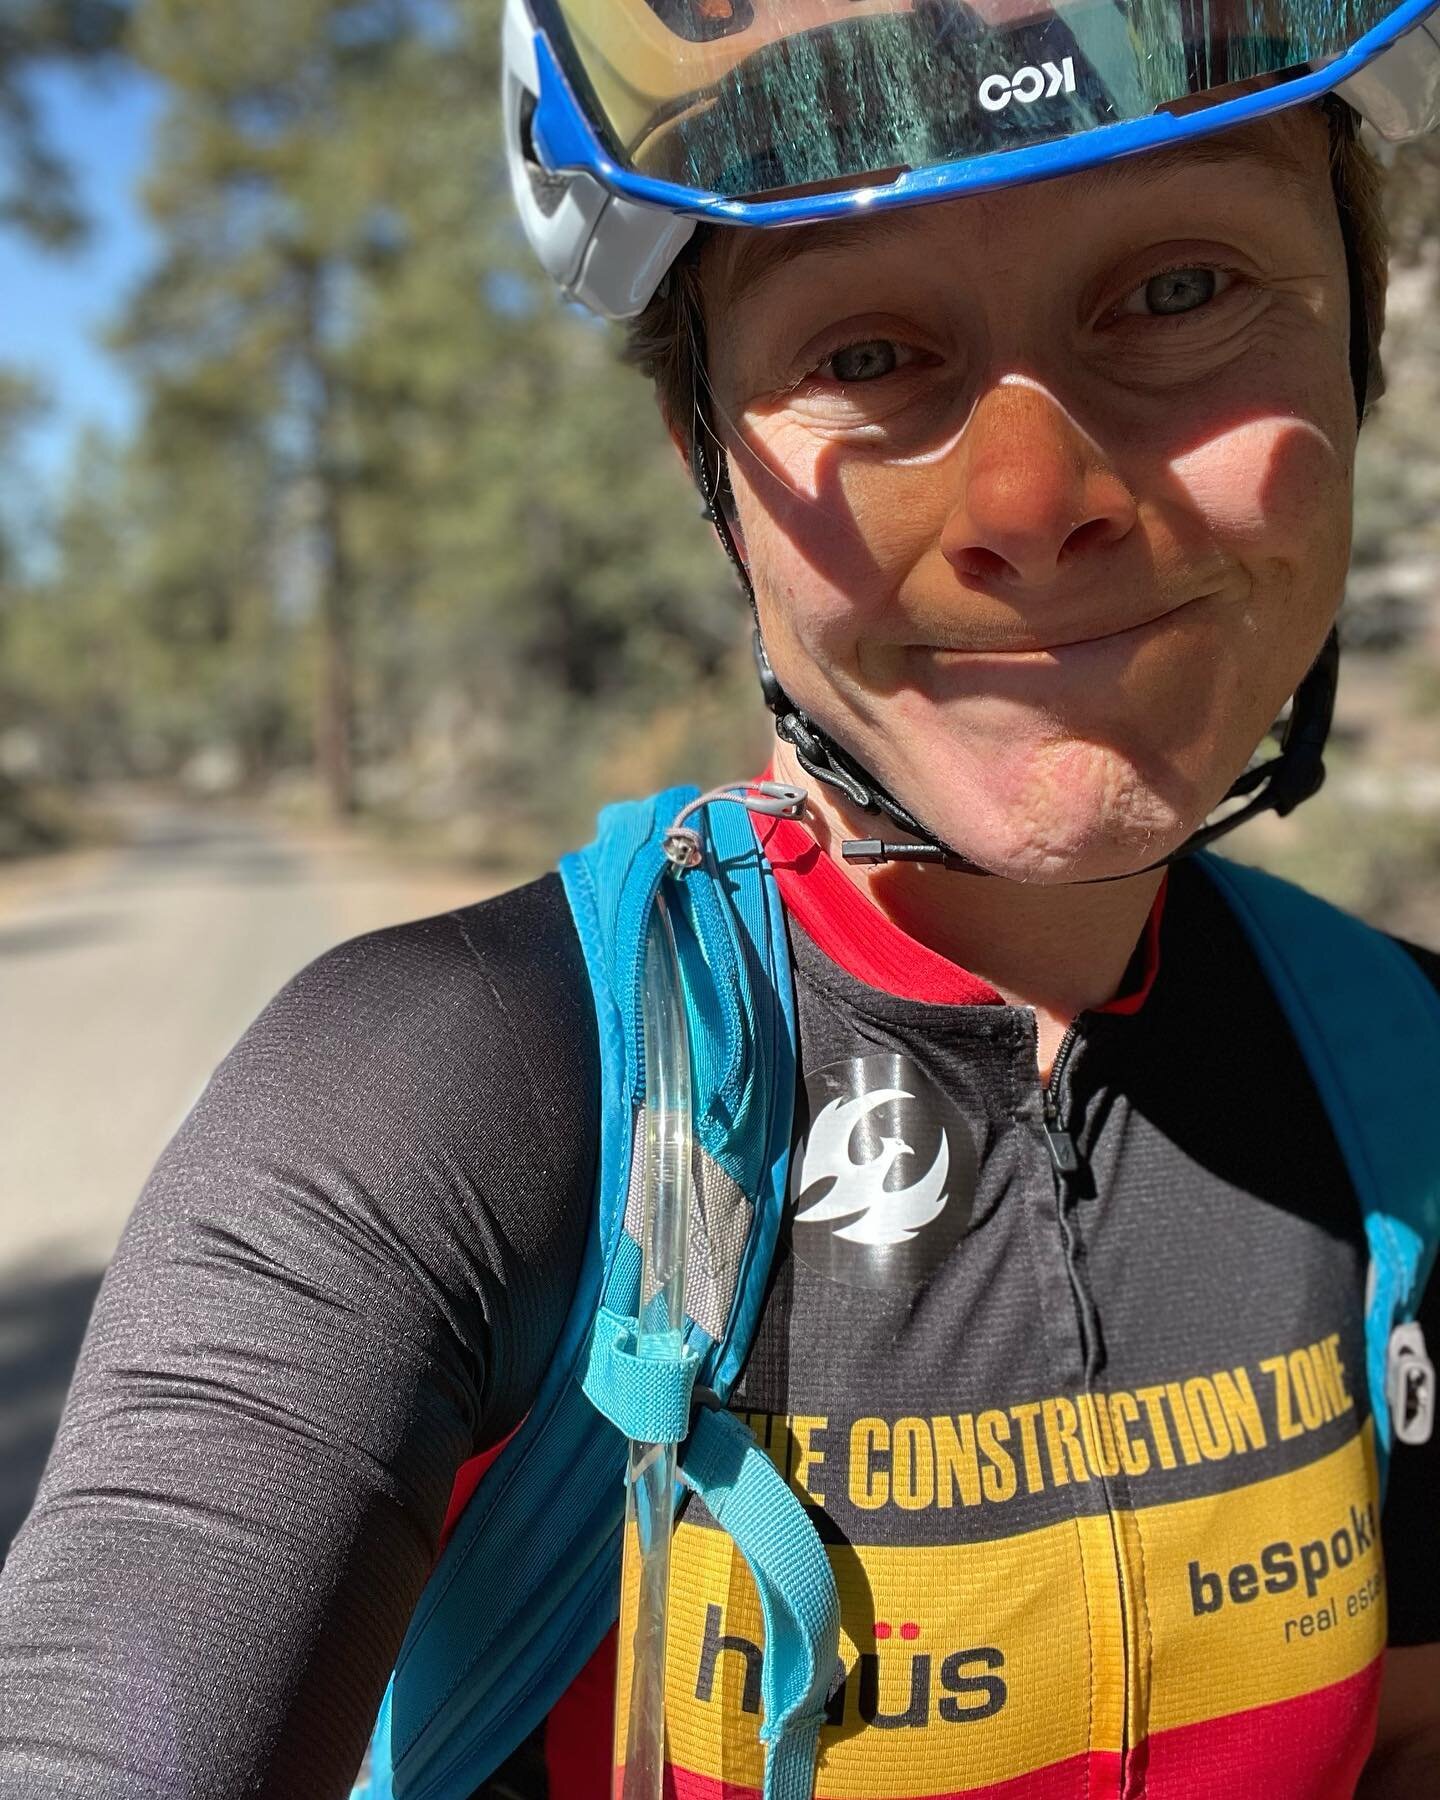 Hey all! 👋 Chloe here. 
Yesterday was the day I had scheduled to pedal the 66.6 mi Prescott Trails Challenge route. I&rsquo;d been looking forward to the day since I plotted it out on Strava early-summer. It linked together many of my favorite trail